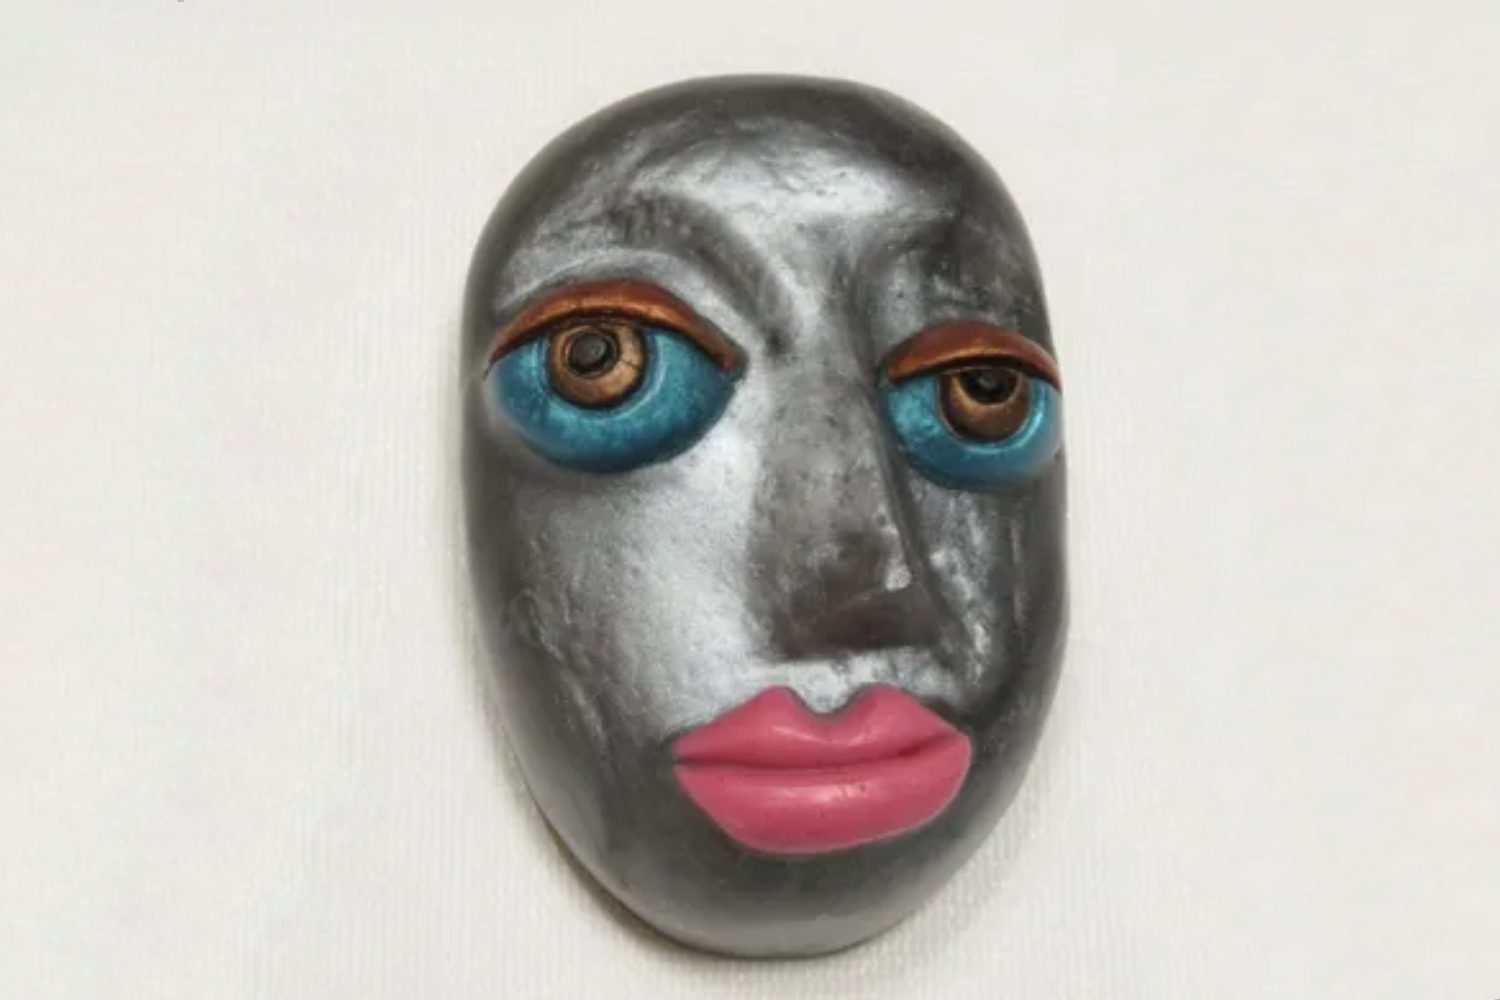 A silver face with pink lips and blue eyes.